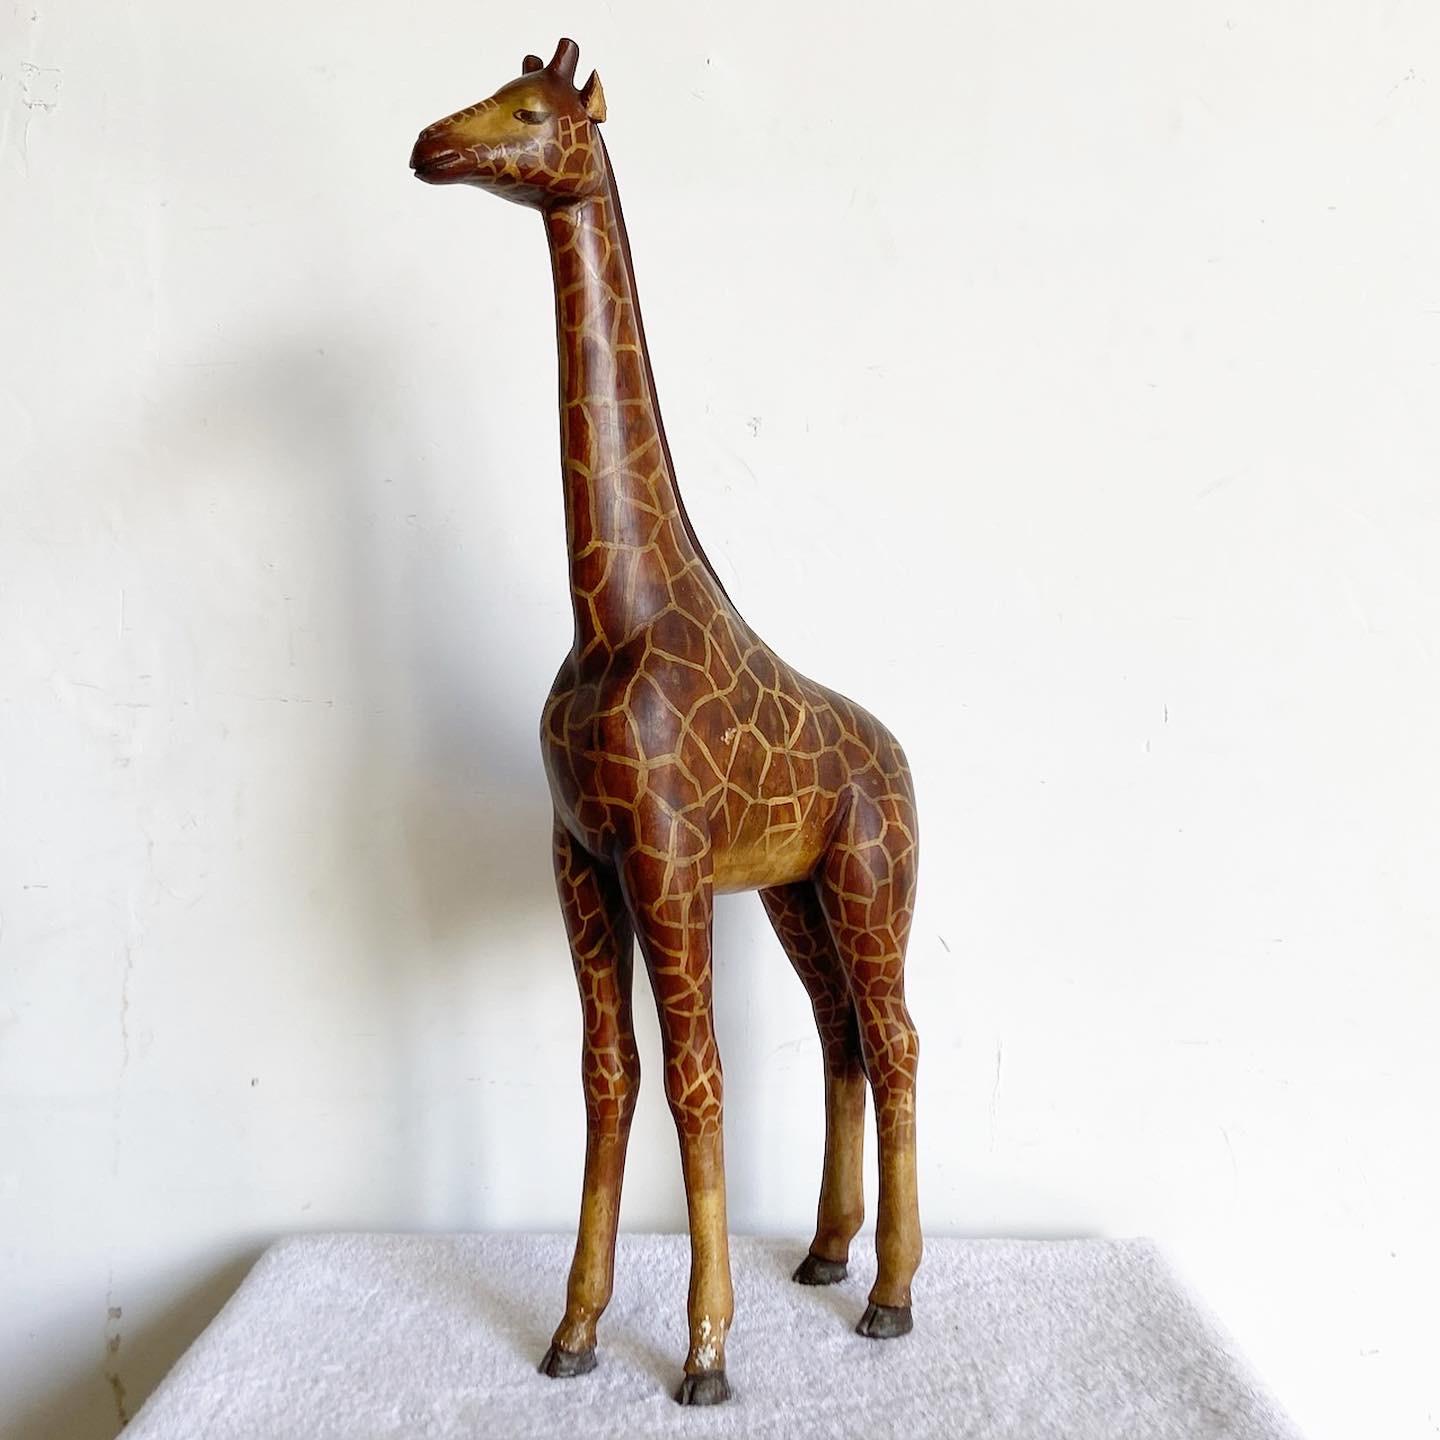 Elevate your space with a vintage giraffe sculpture. Meticulously crafted, this captivating piece adds wildlife charm and uniqueness to any room.

Vintage giraffe sculpture
Meticulously crafted
Adds wildlife charm to your space
Perfect for